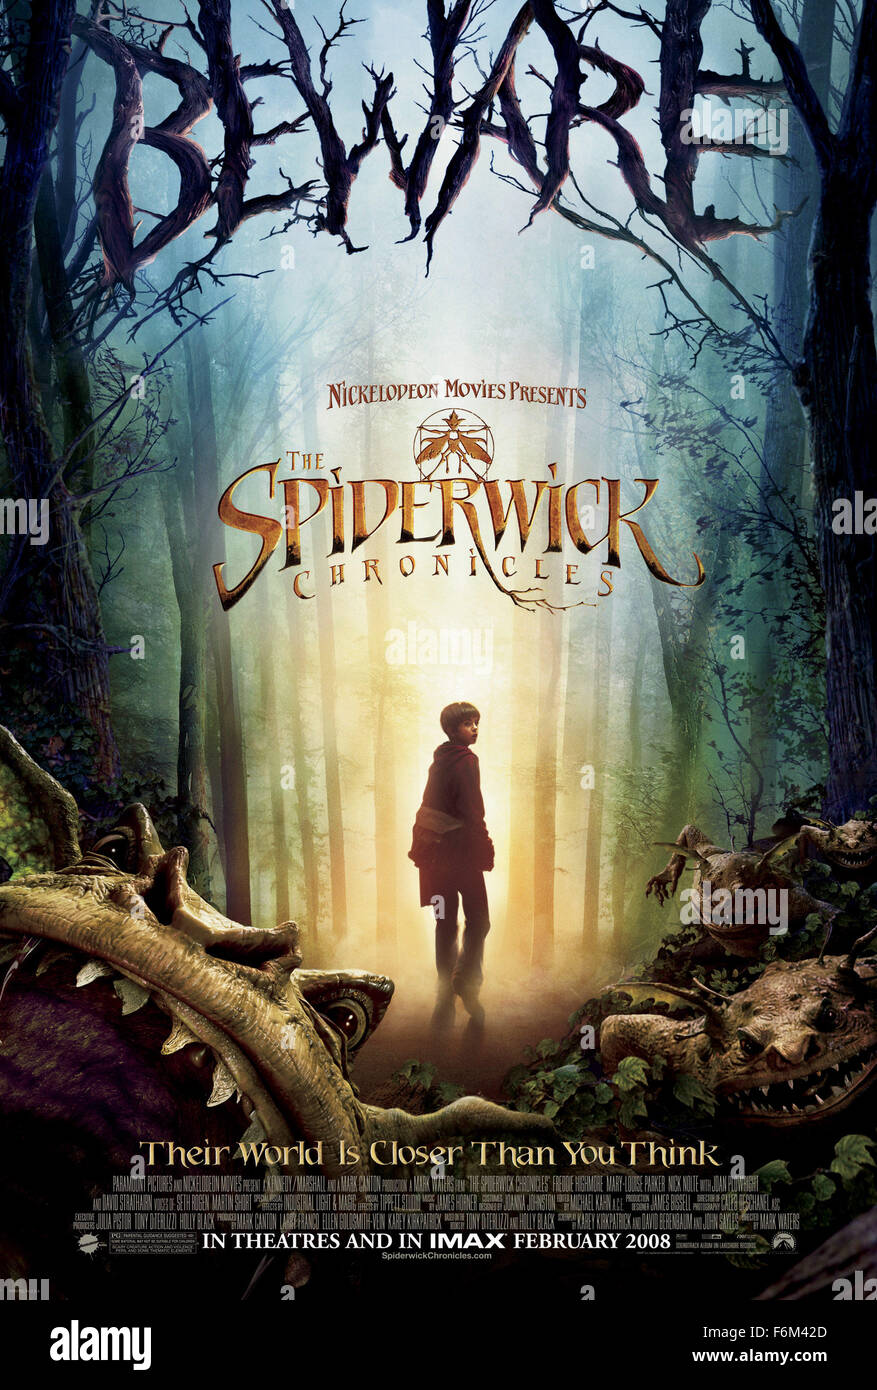 RELEASE DATE February 15, 2008. MOVIE TITLE The Spiderwick Chronicles